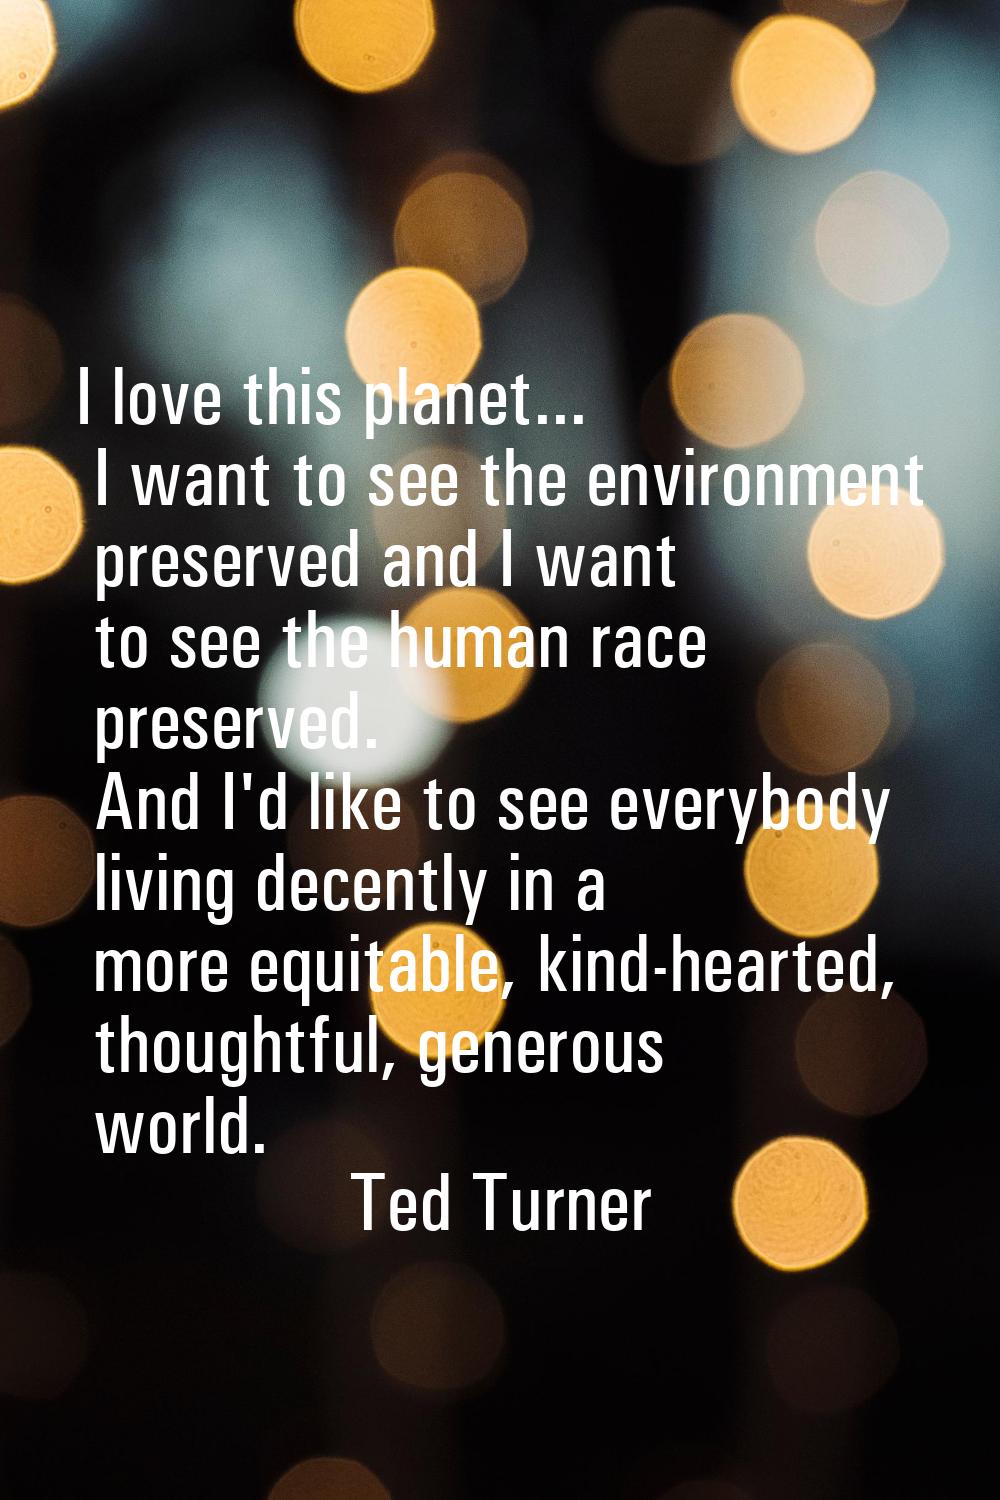 I love this planet... I want to see the environment preserved and I want to see the human race pres